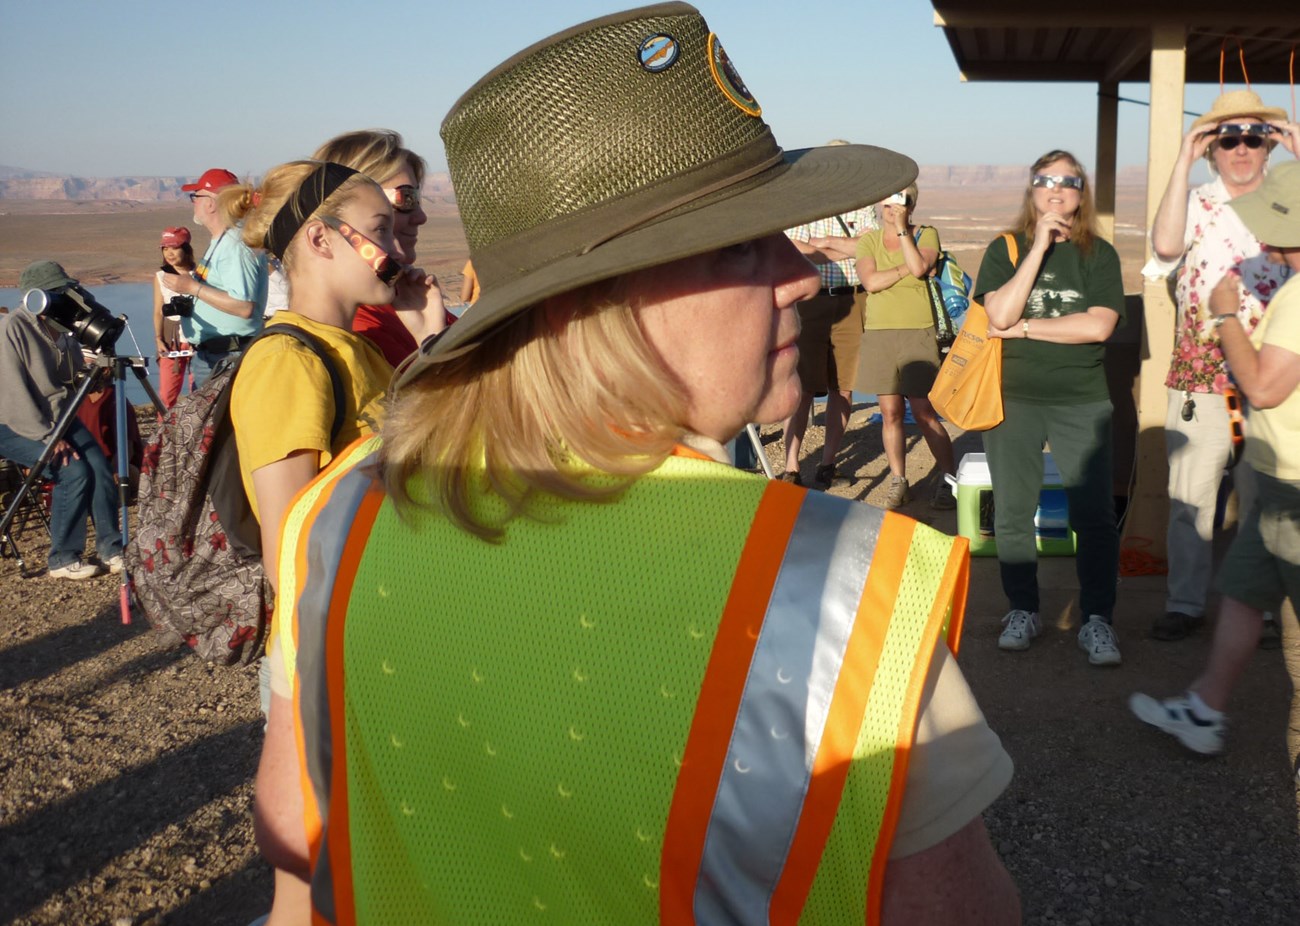 Park Ranger with images of a partial eclipse projected onto her reflective safety vest. People in background use eclipse glasses to view the sky.